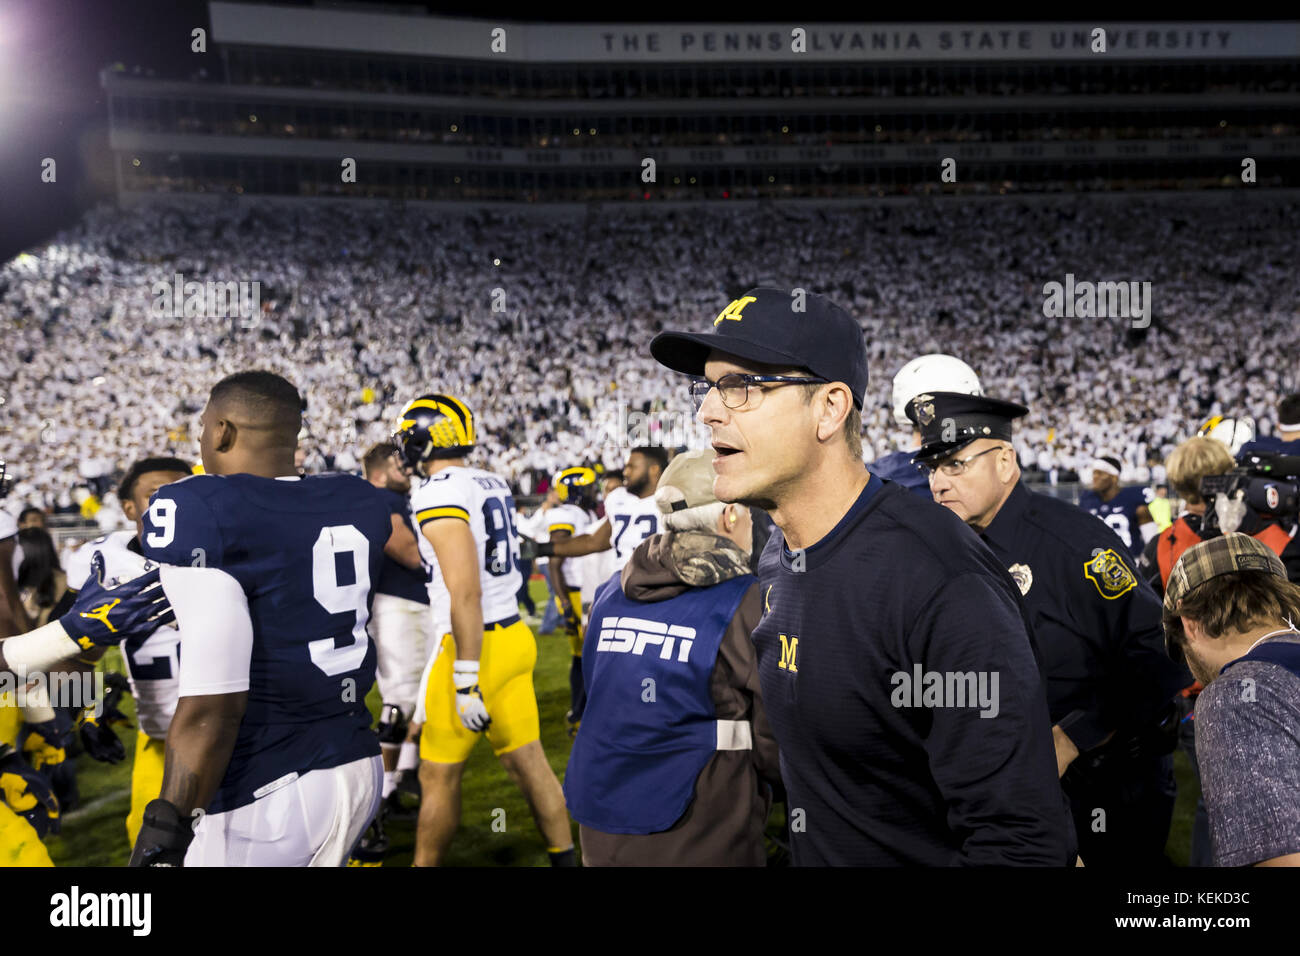 University Park, Pennsylvania, USA. 21st Oct, 2017. October 21, 2017: Michigan Wolverines head coach Jim Harbaugh after the NCAA football game between the Michigan Wolverines and the Penn State Nittany Lions at Beaver Stadium in University Park, Pennsylvania. Credit: Scott Taetsch/ZUMA Wire/Alamy Live News Stock Photo